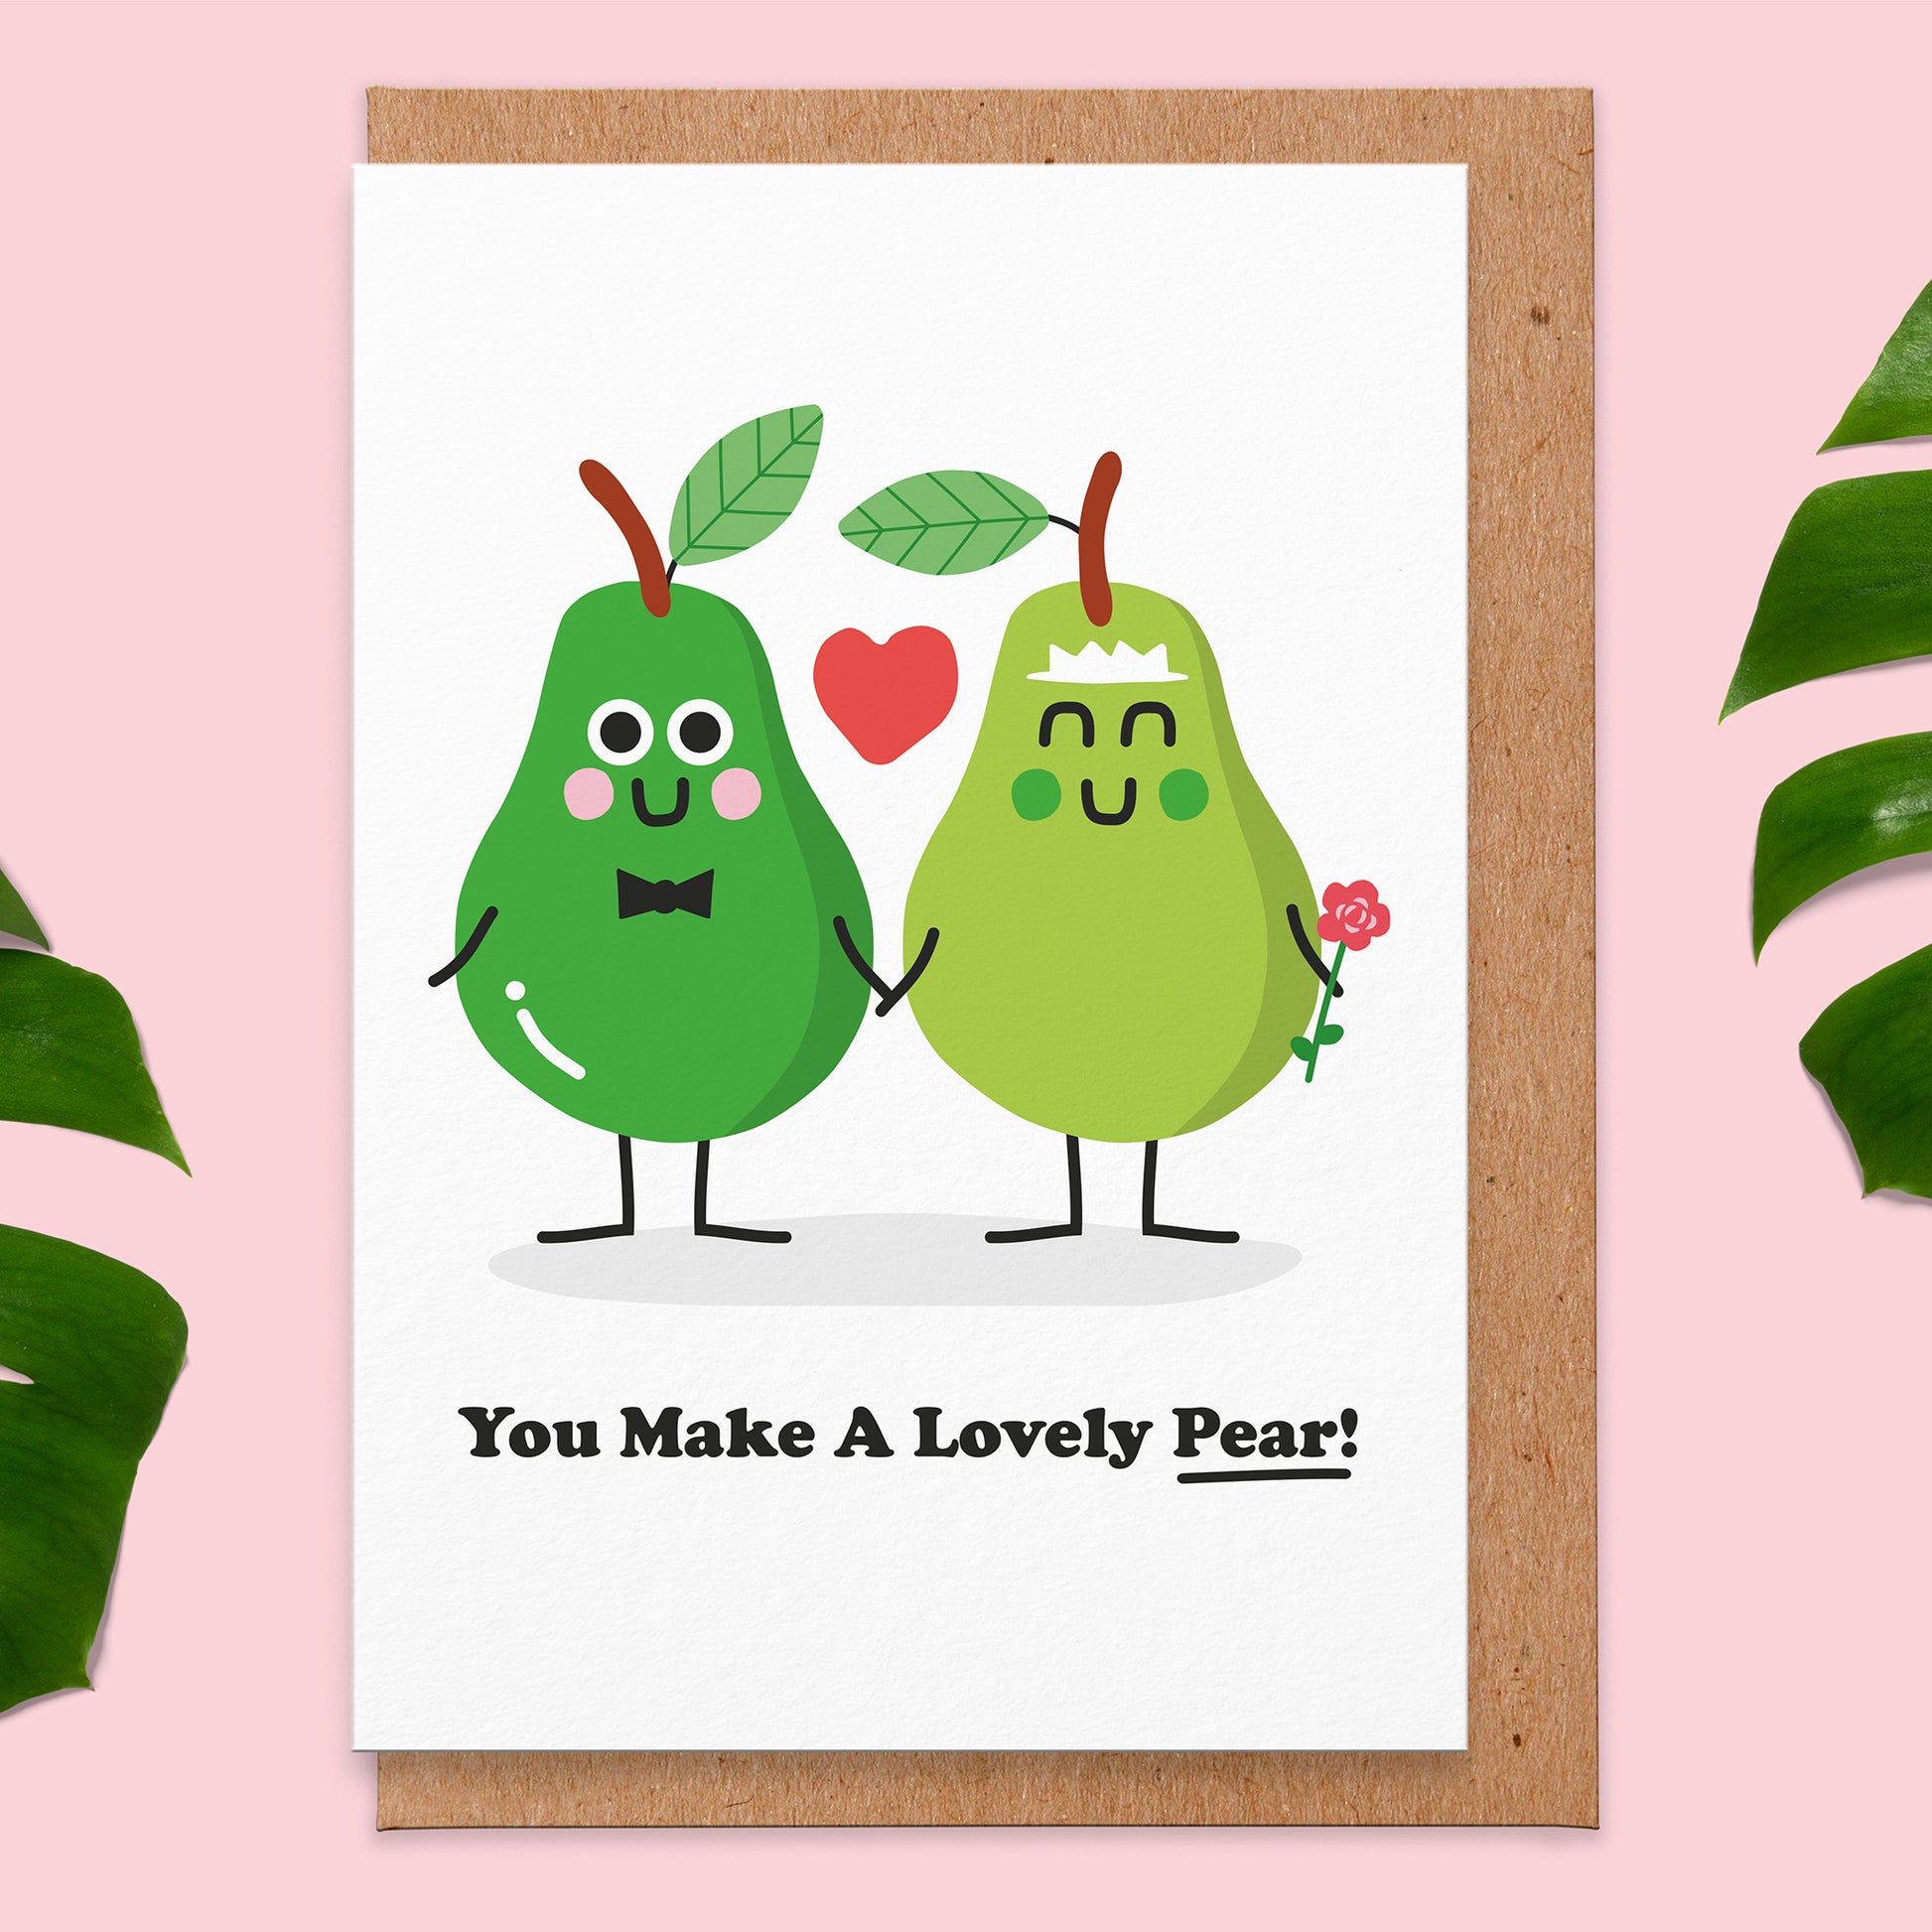 Wedding card with an illustration of two pears , one is a bride and the other is a groom. The text reads you make a lovely pear!